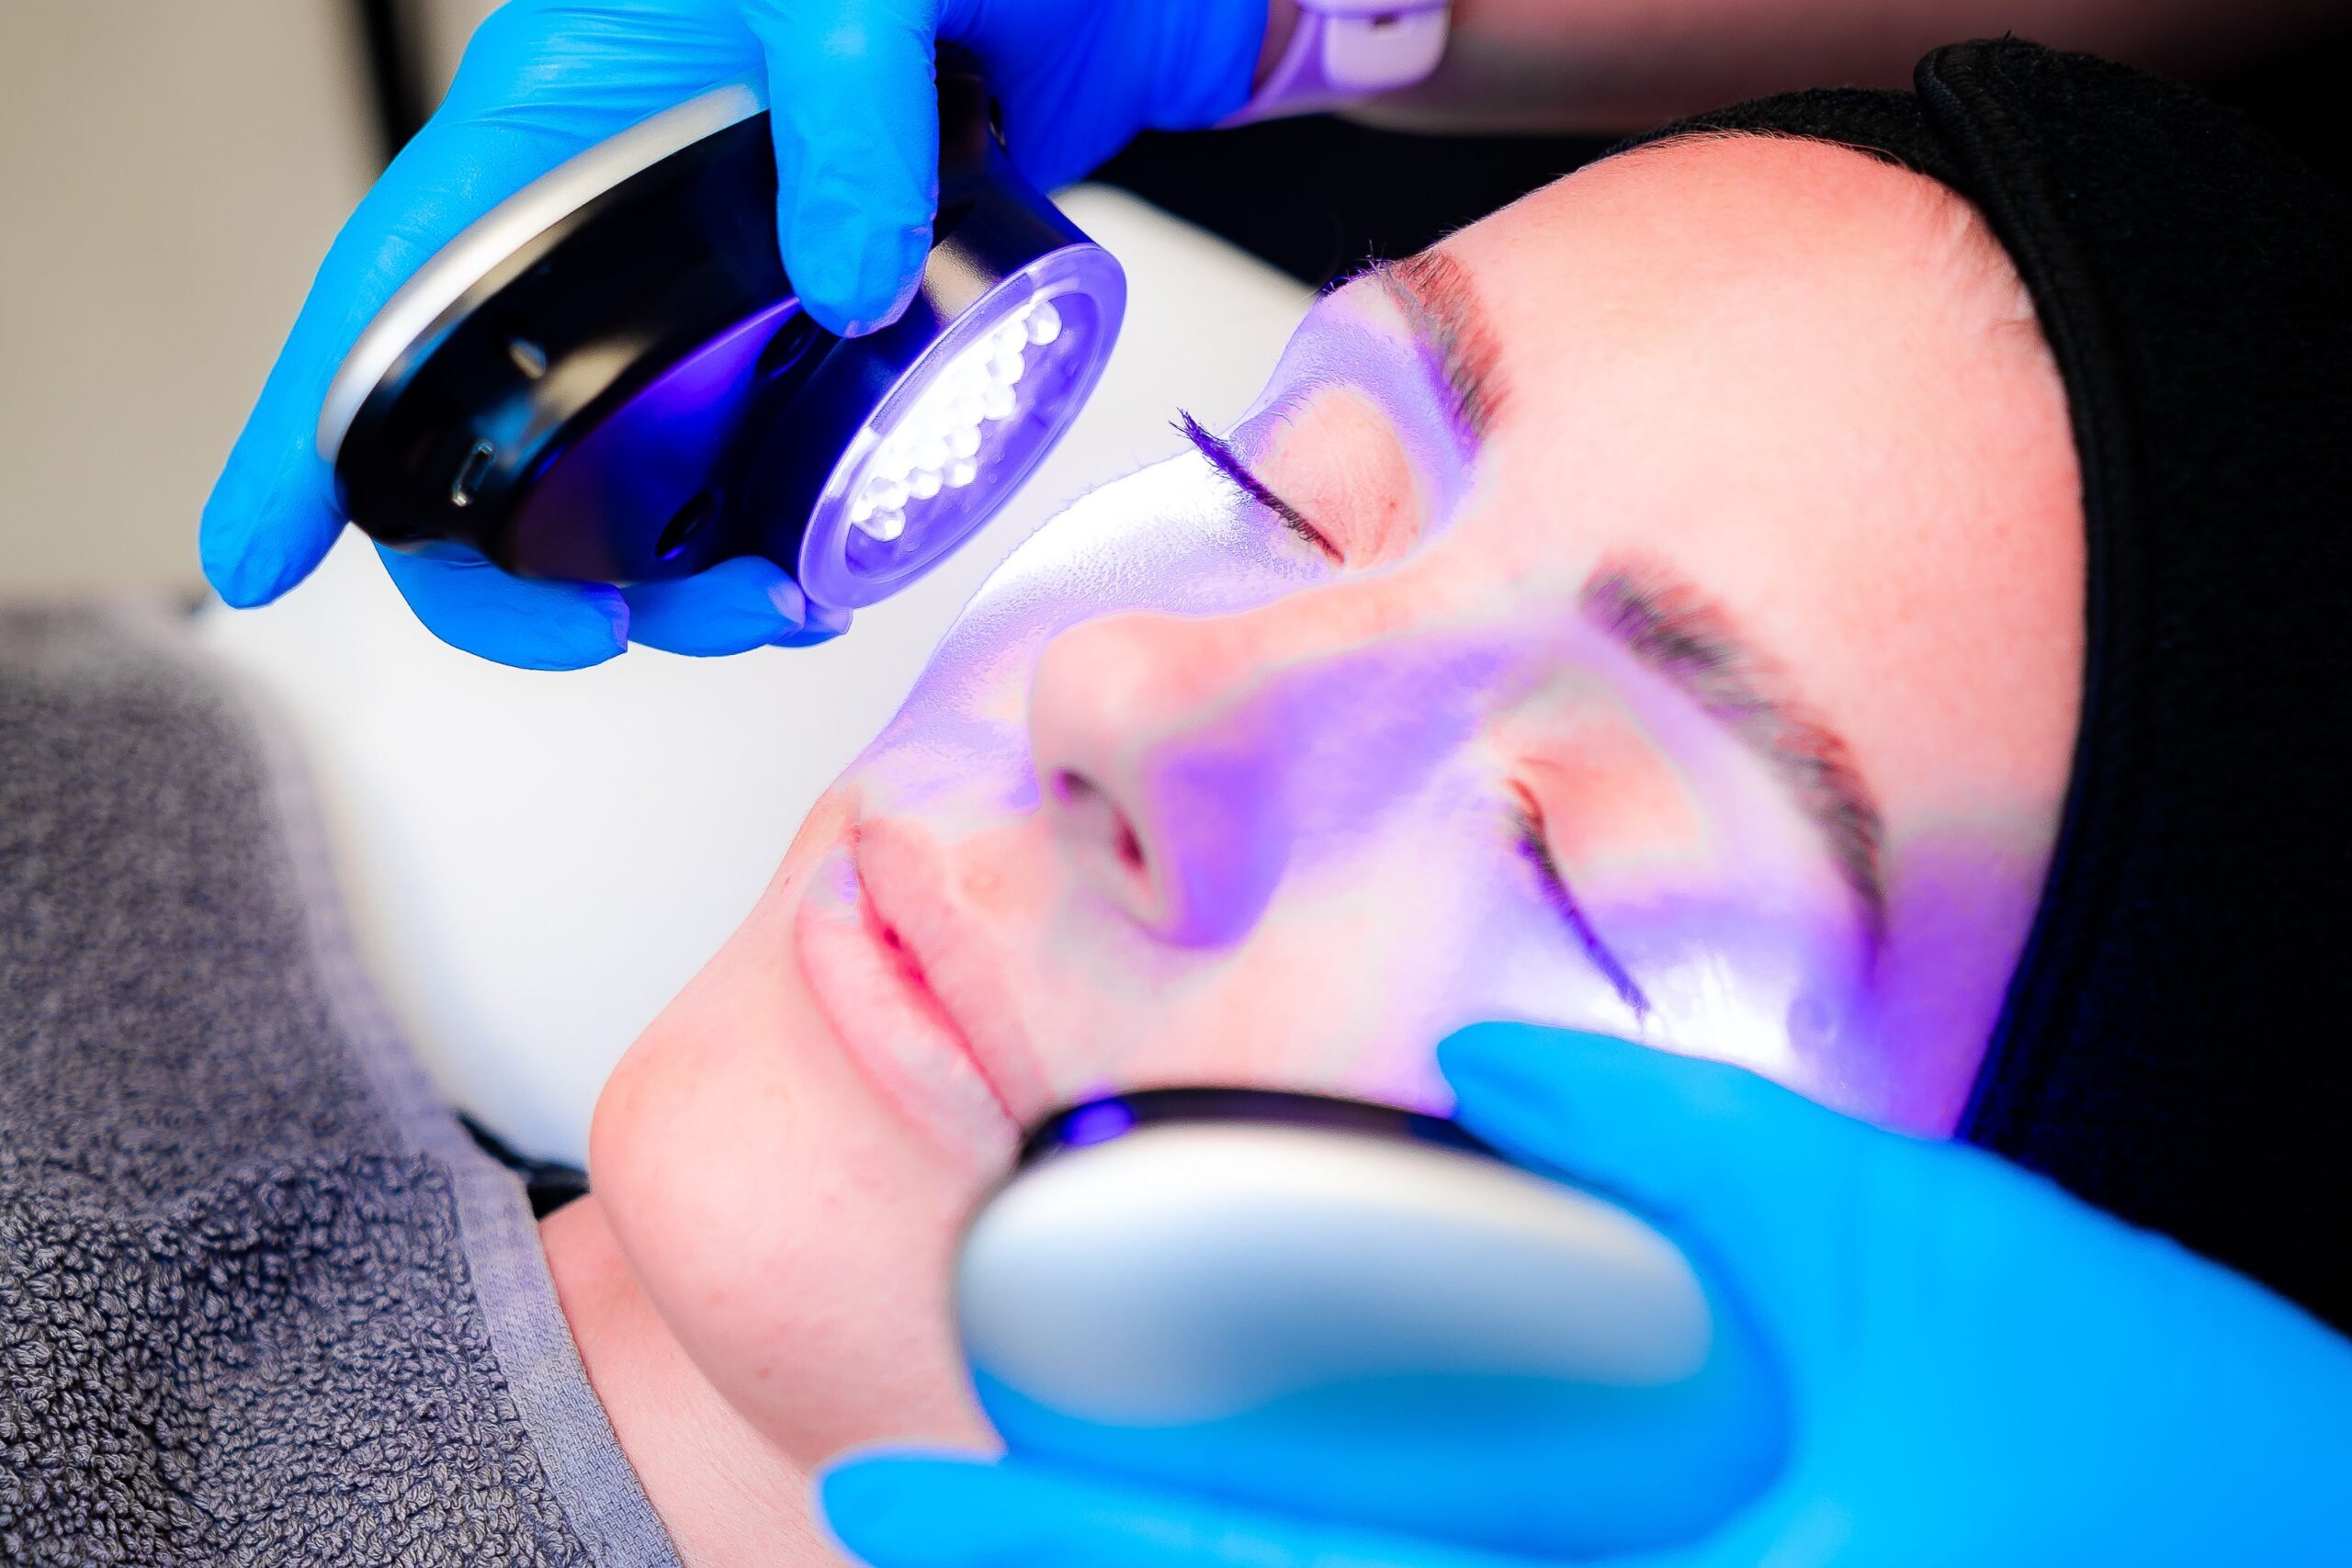 Photofacial Treatments for rosacea at Freyja Medical in Wrexham, Nantwich and Cheshire